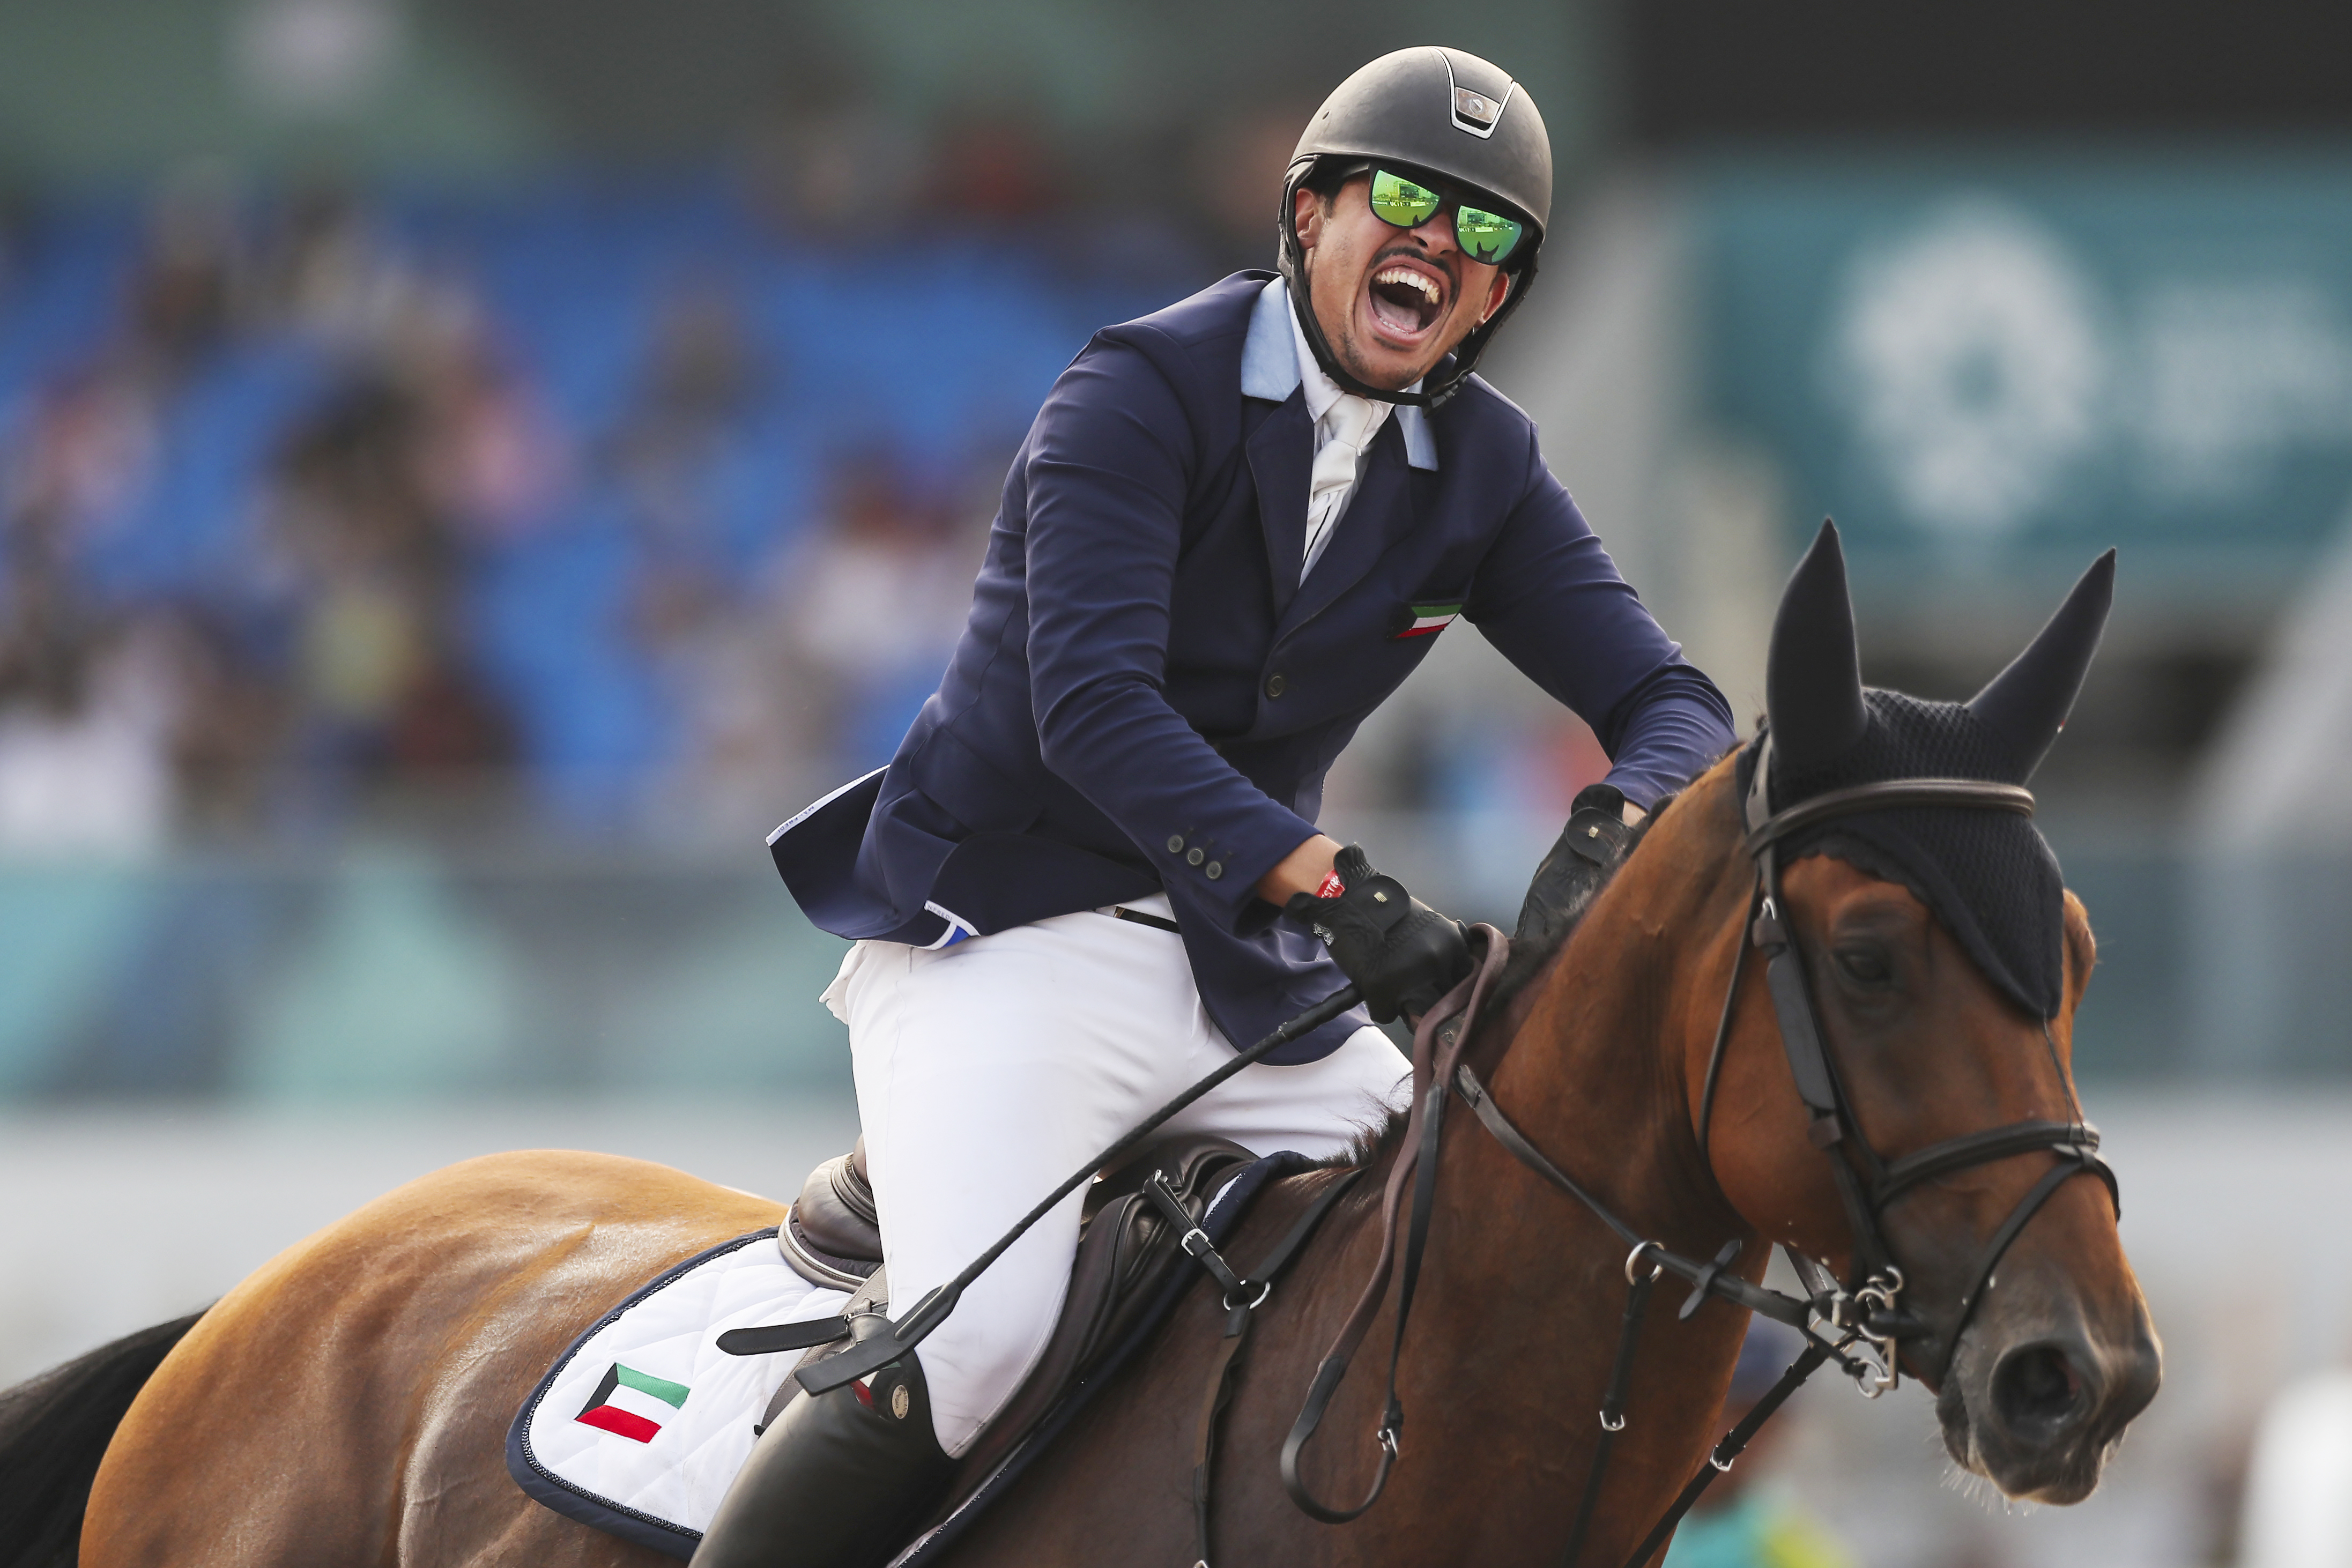 Talal Al Zahem of Kuwait, riding Cannonball Du Toultia Z, celebrates during the jumping event at the equestrian competition of the 18th Asian Games at Jakarta International Equestrian Park on August 28, 2018 in Jakarta, Indonesia. Photo FEI/Yong Teck Lim